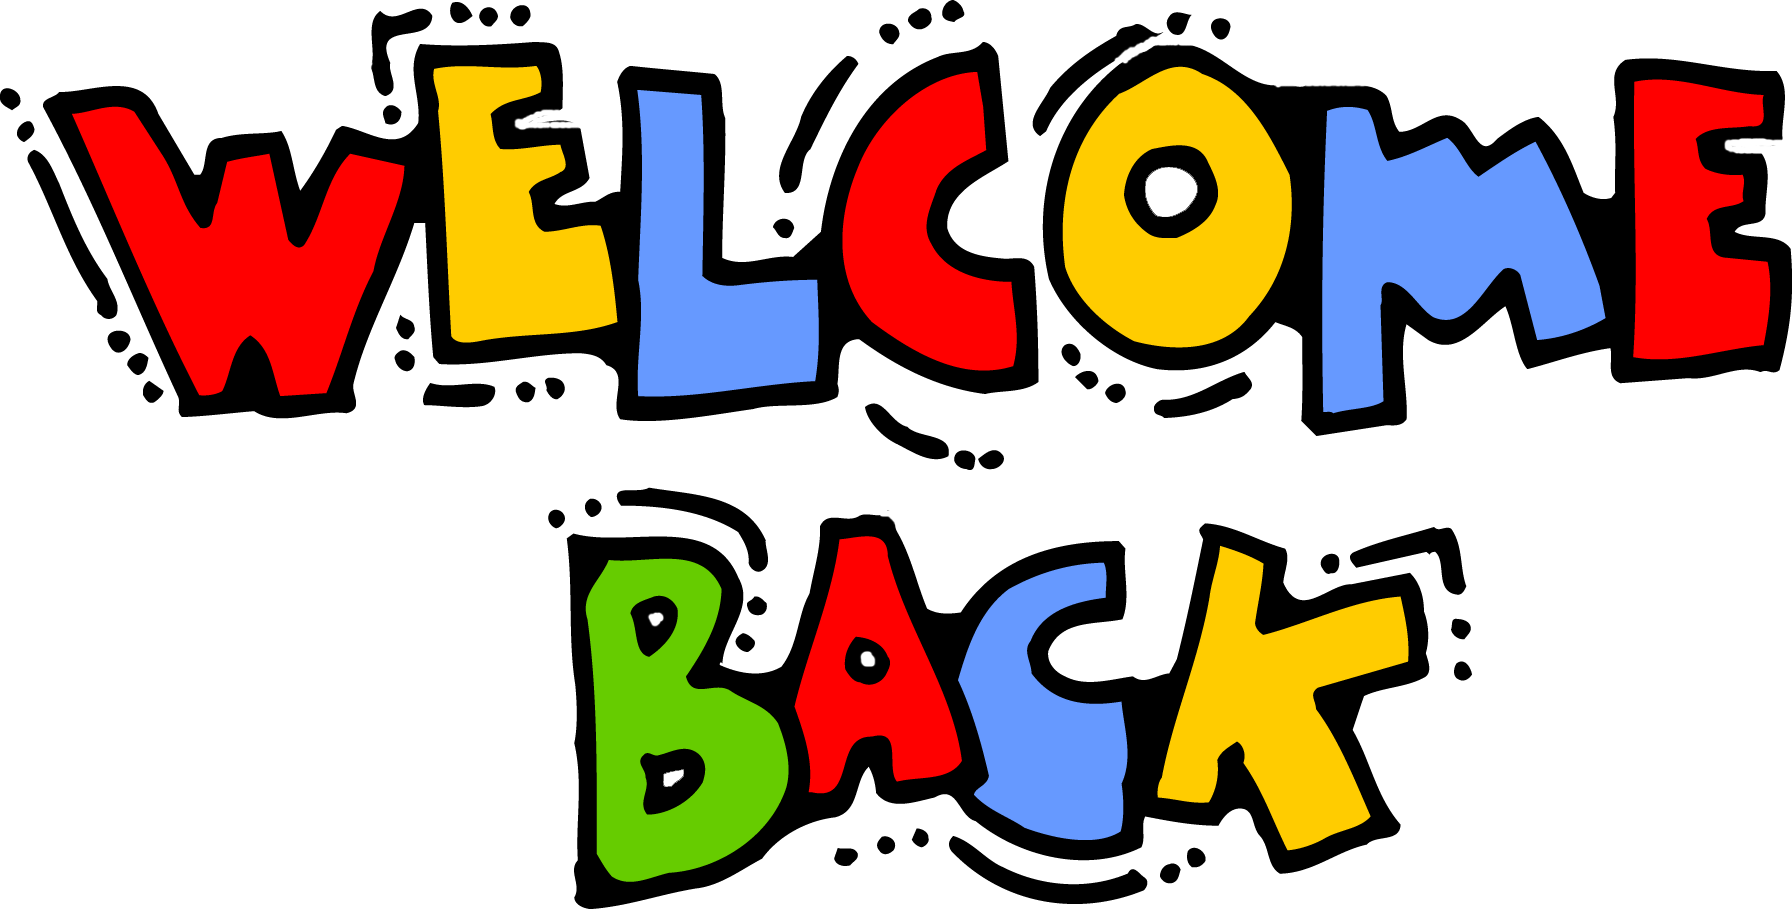 Welcome back sign clipart - ClipartFox